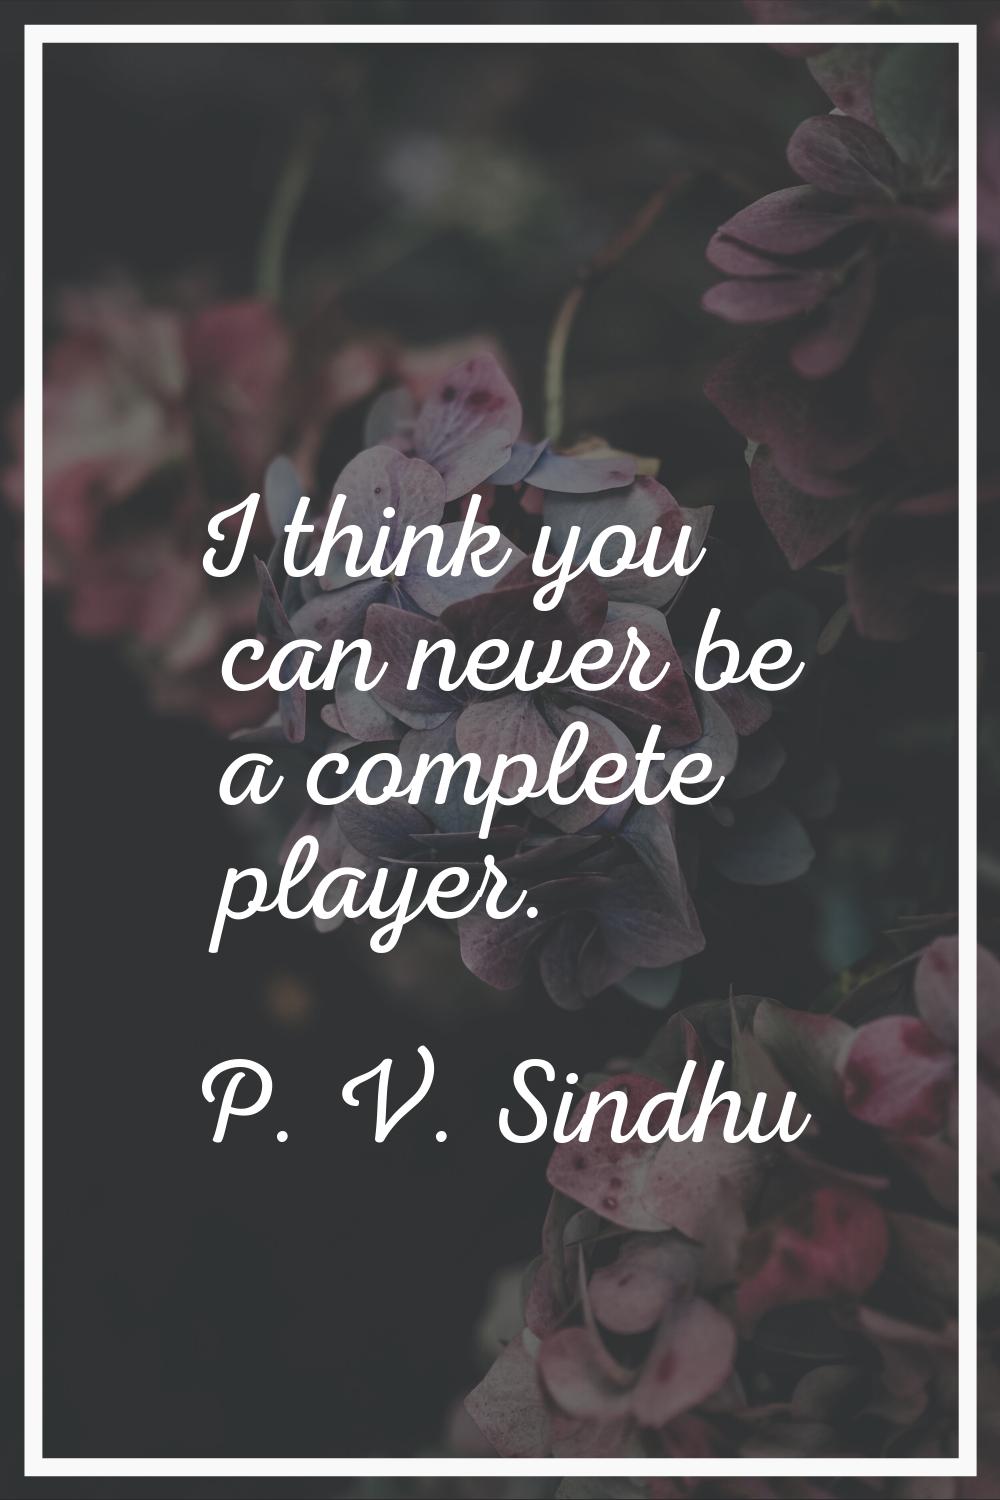 I think you can never be a complete player.